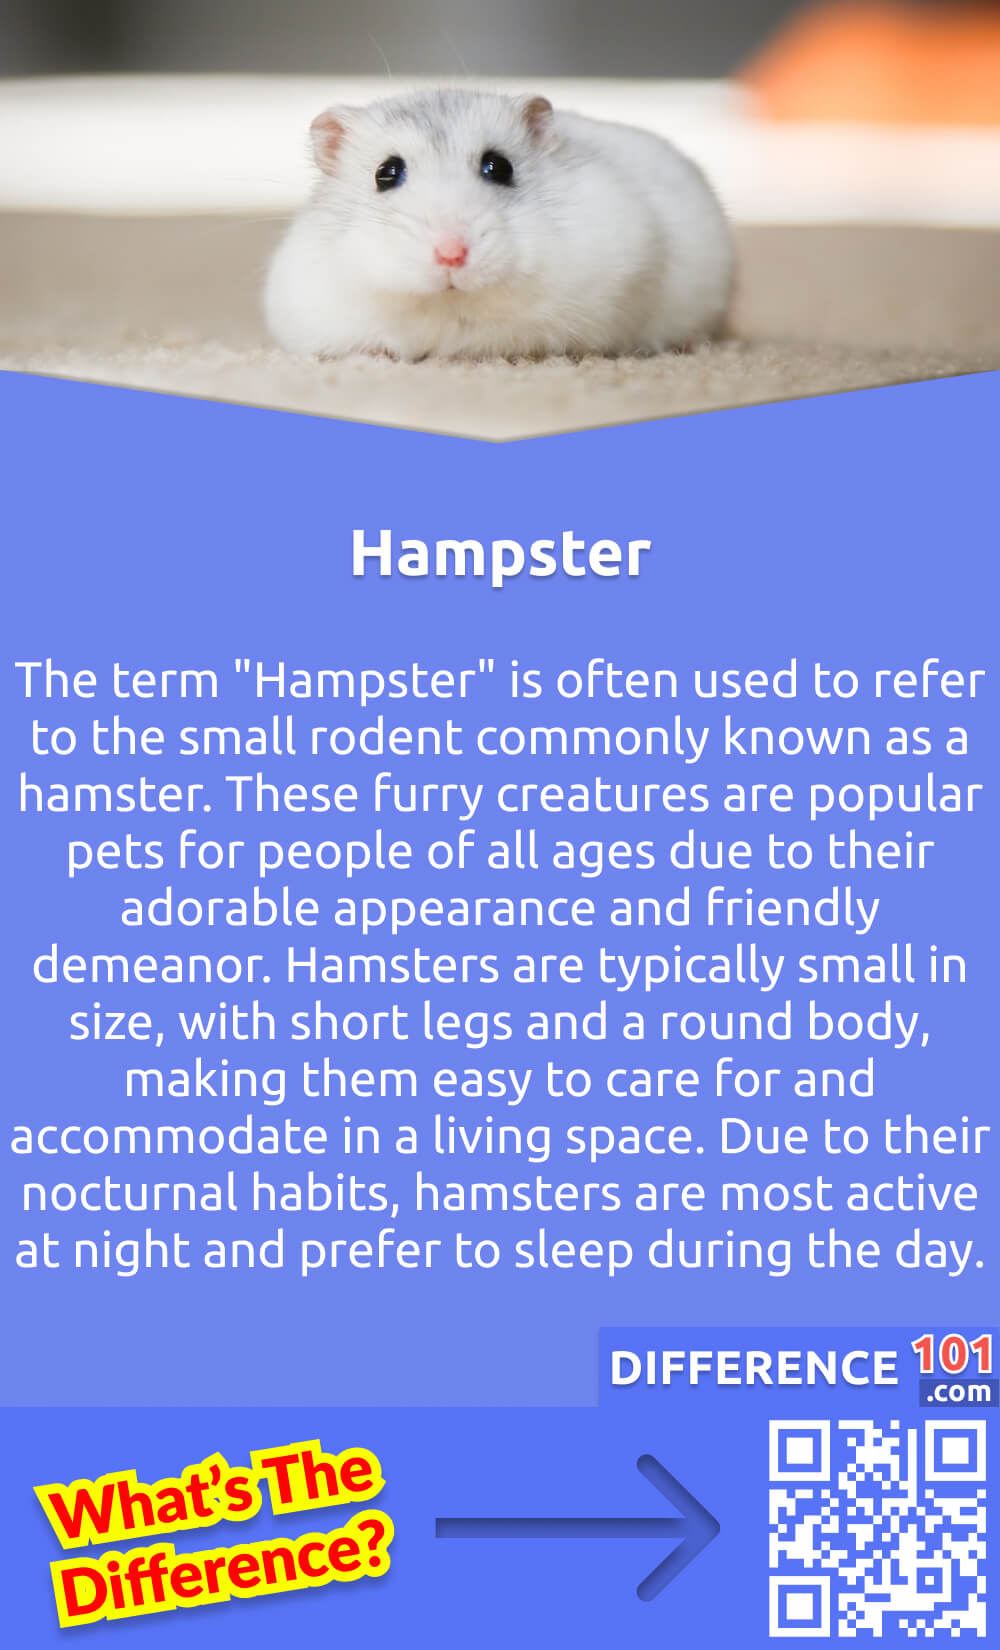 What Is Hampster? Although spelled incorrectly, the term "Hampster" is often used to refer to the small rodent commonly known as a hamster. These furry creatures are popular pets for people of all ages due to their adorable appearance and friendly demeanor. Hamsters are typically small in size, with short legs and a round body, making them easy to care for and accommodate in a living space. Due to their nocturnal habits, hamsters are most active at night and prefer to sleep during the day. They are also known for their quick movements and the ability to store large quantities of food in their cheeks, making them fascinating creatures to observe and care for.